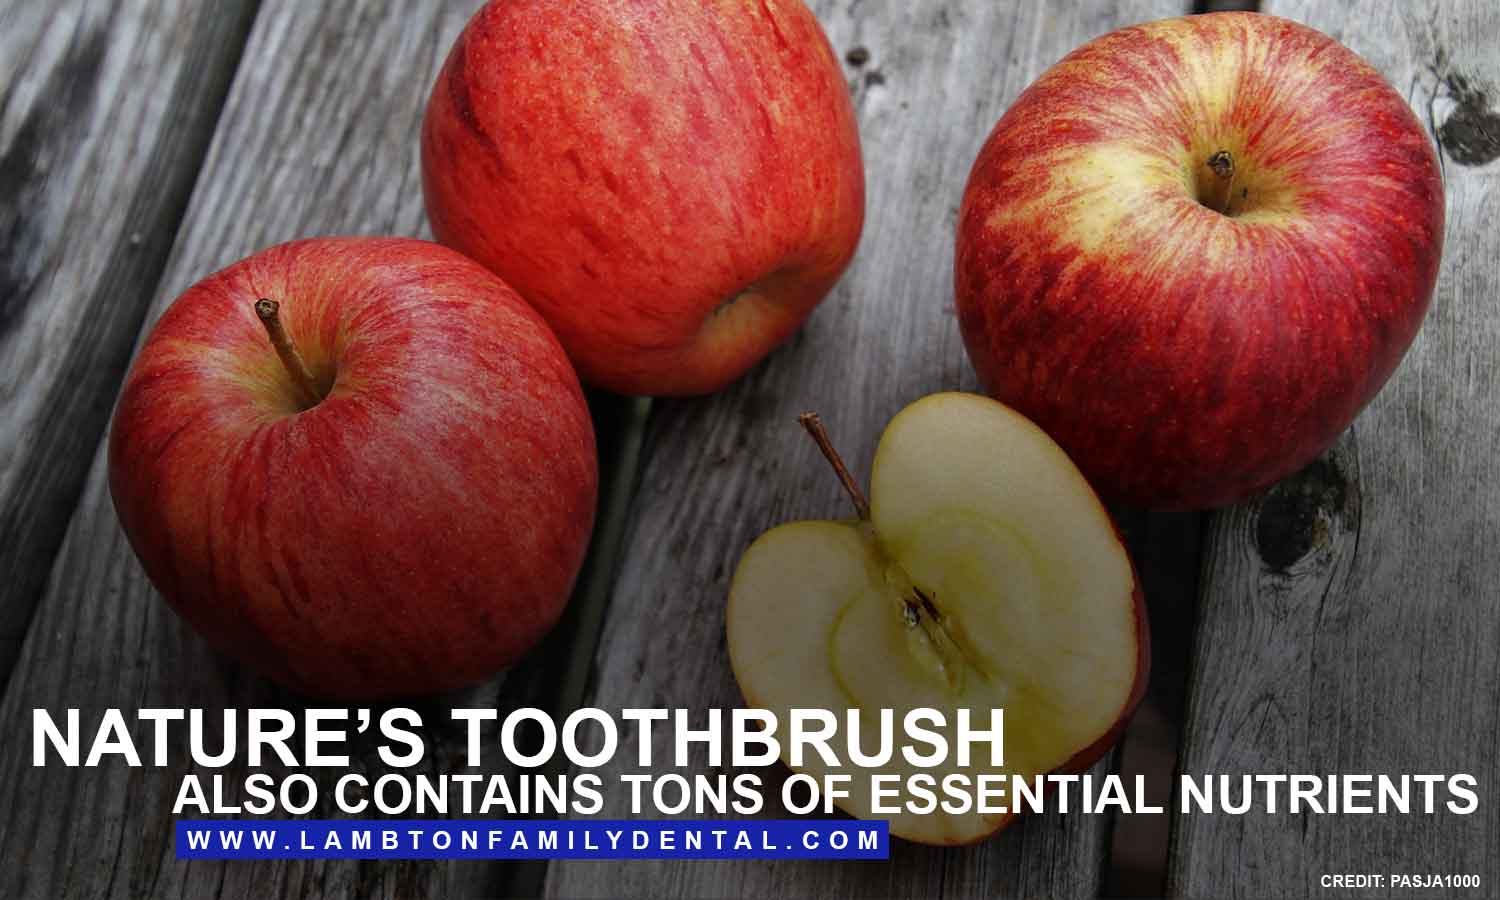 Nature’s toothbrush also contains tons of essential nutrients